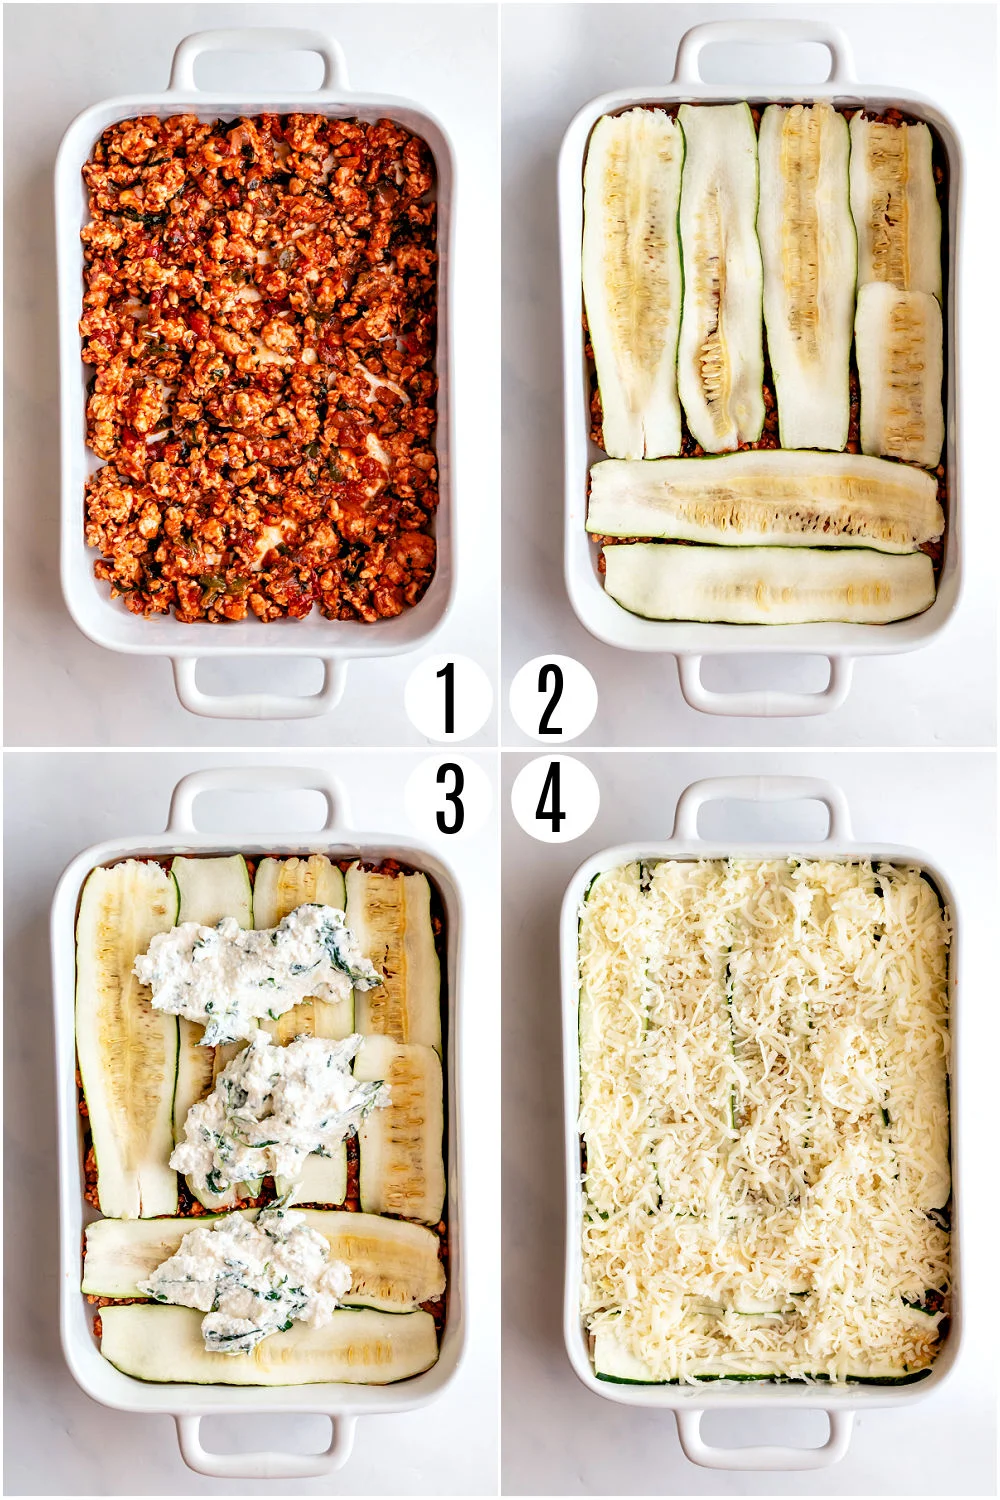 Step by step photos showing how to assemble zucchini lasagna.